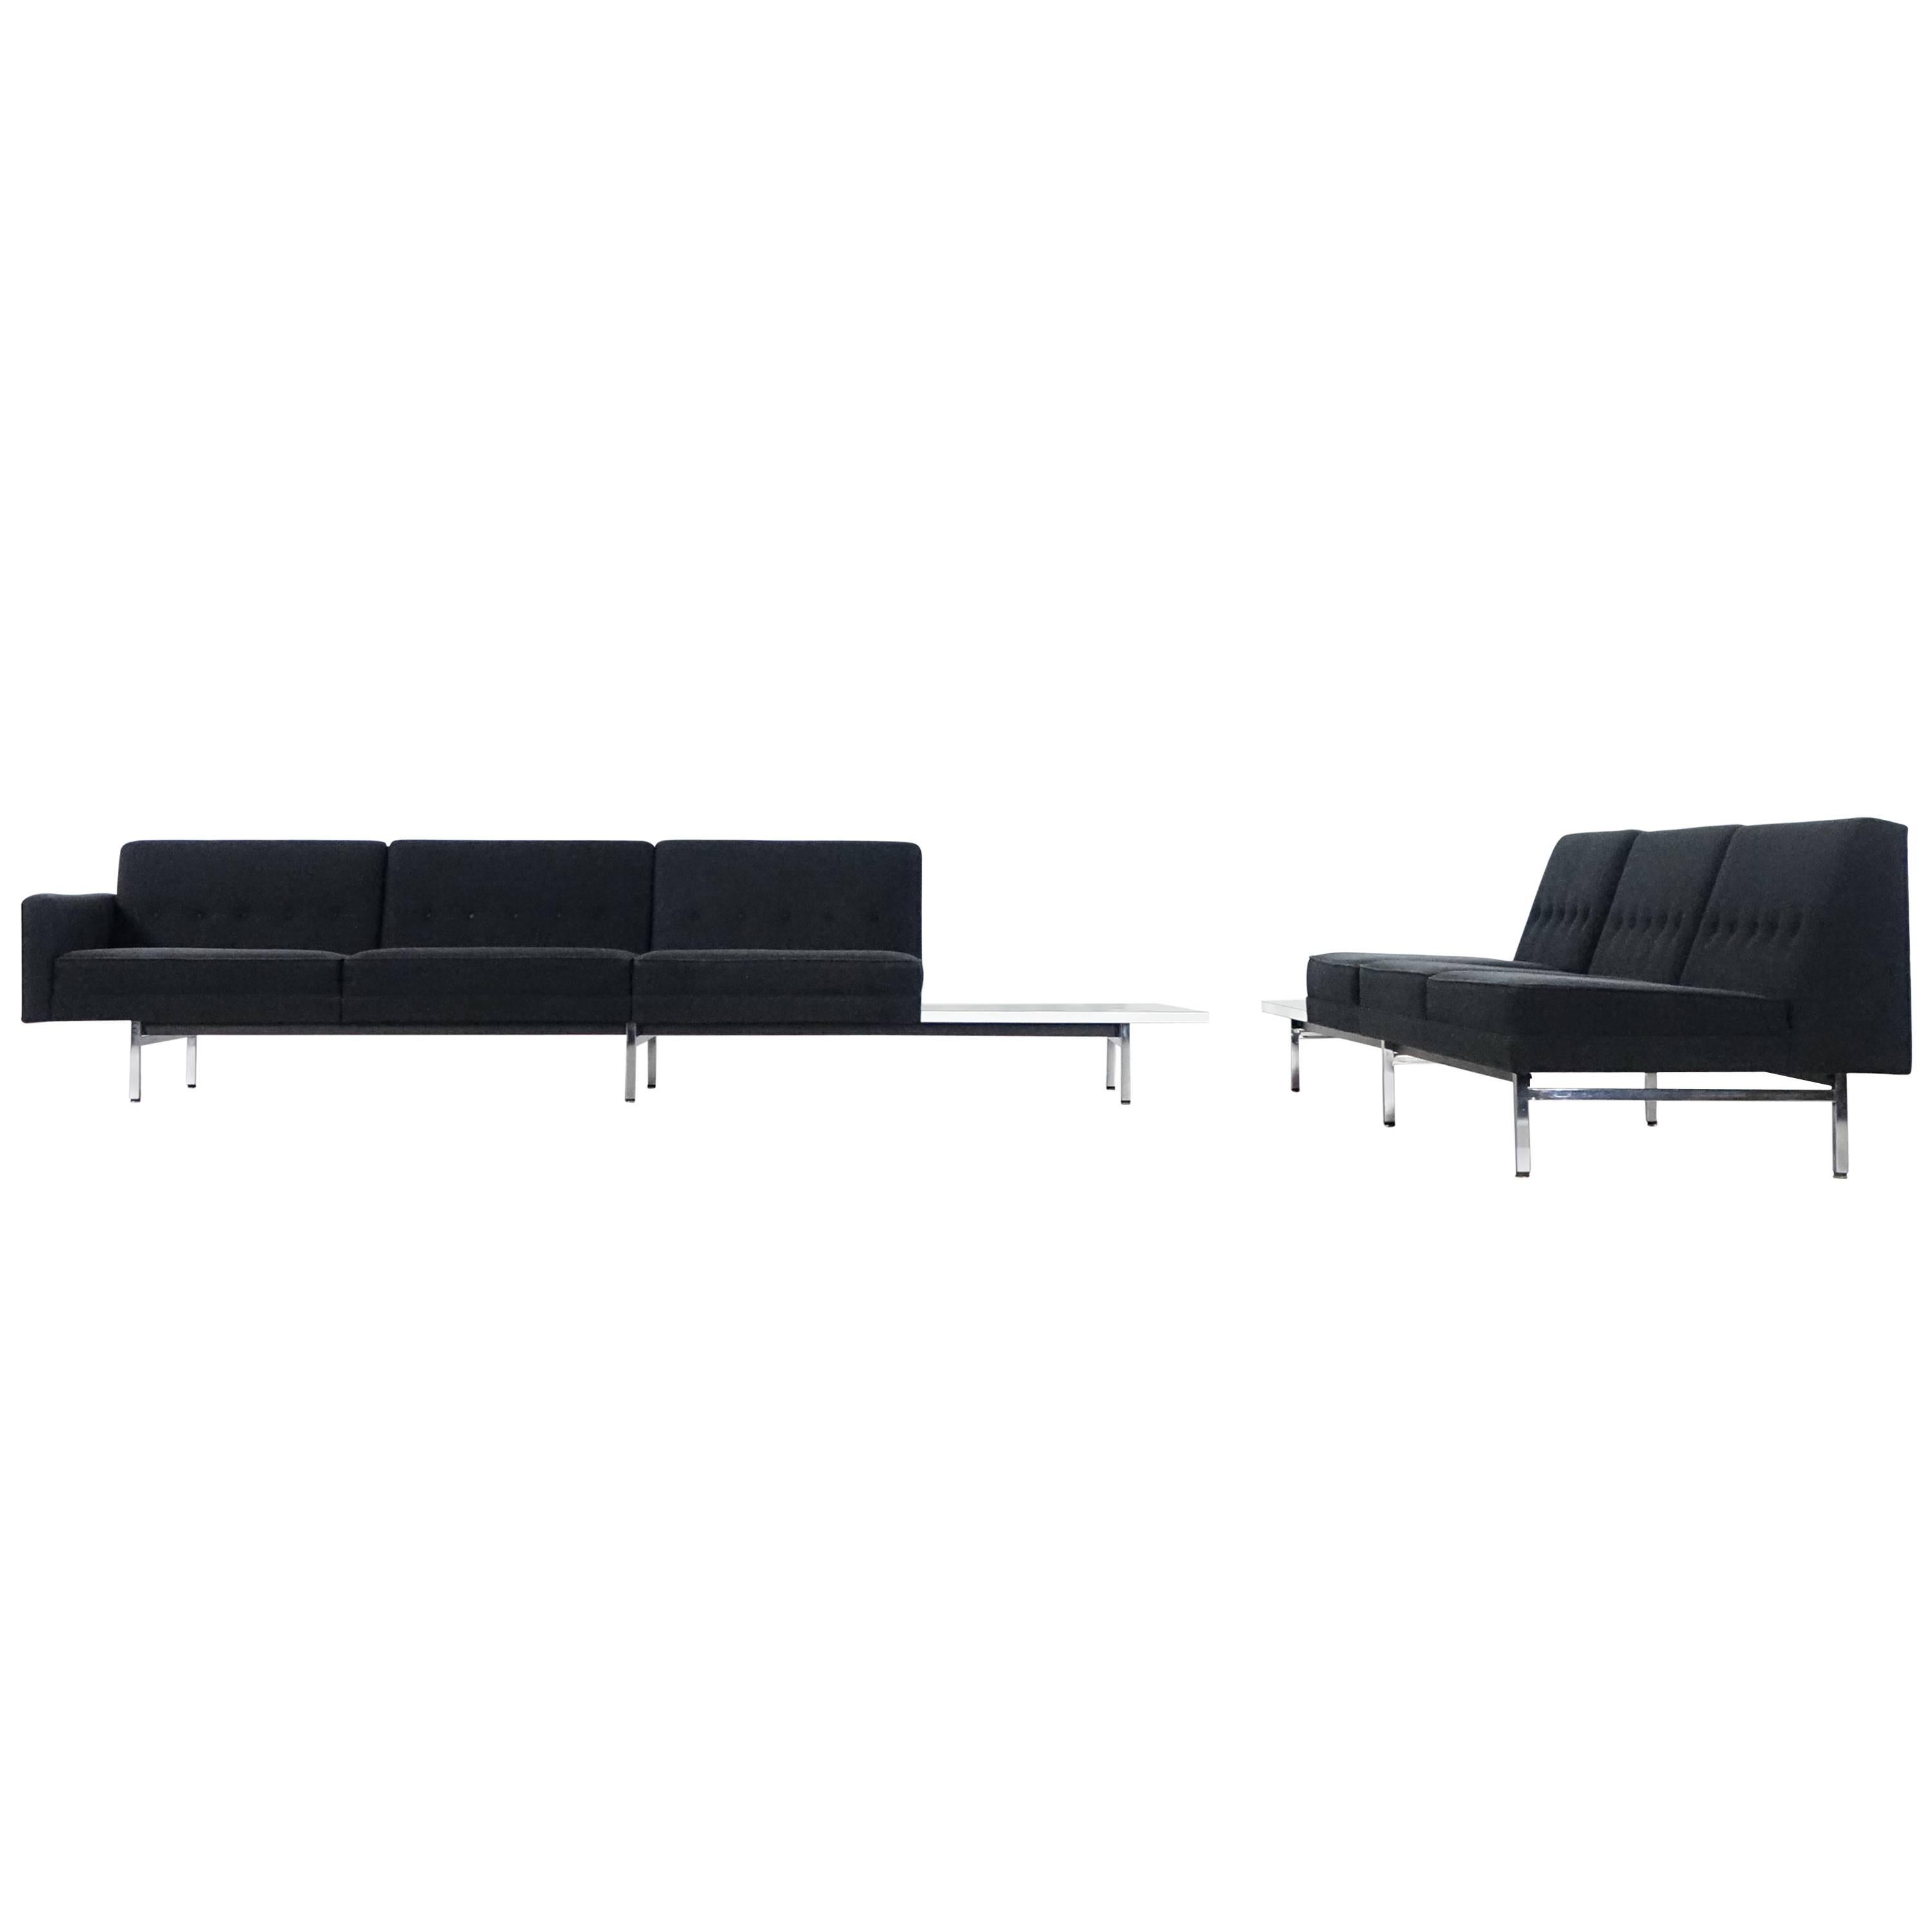 Modular System Seating Suite Sofa by George Nelson for Herman Miller Perfect